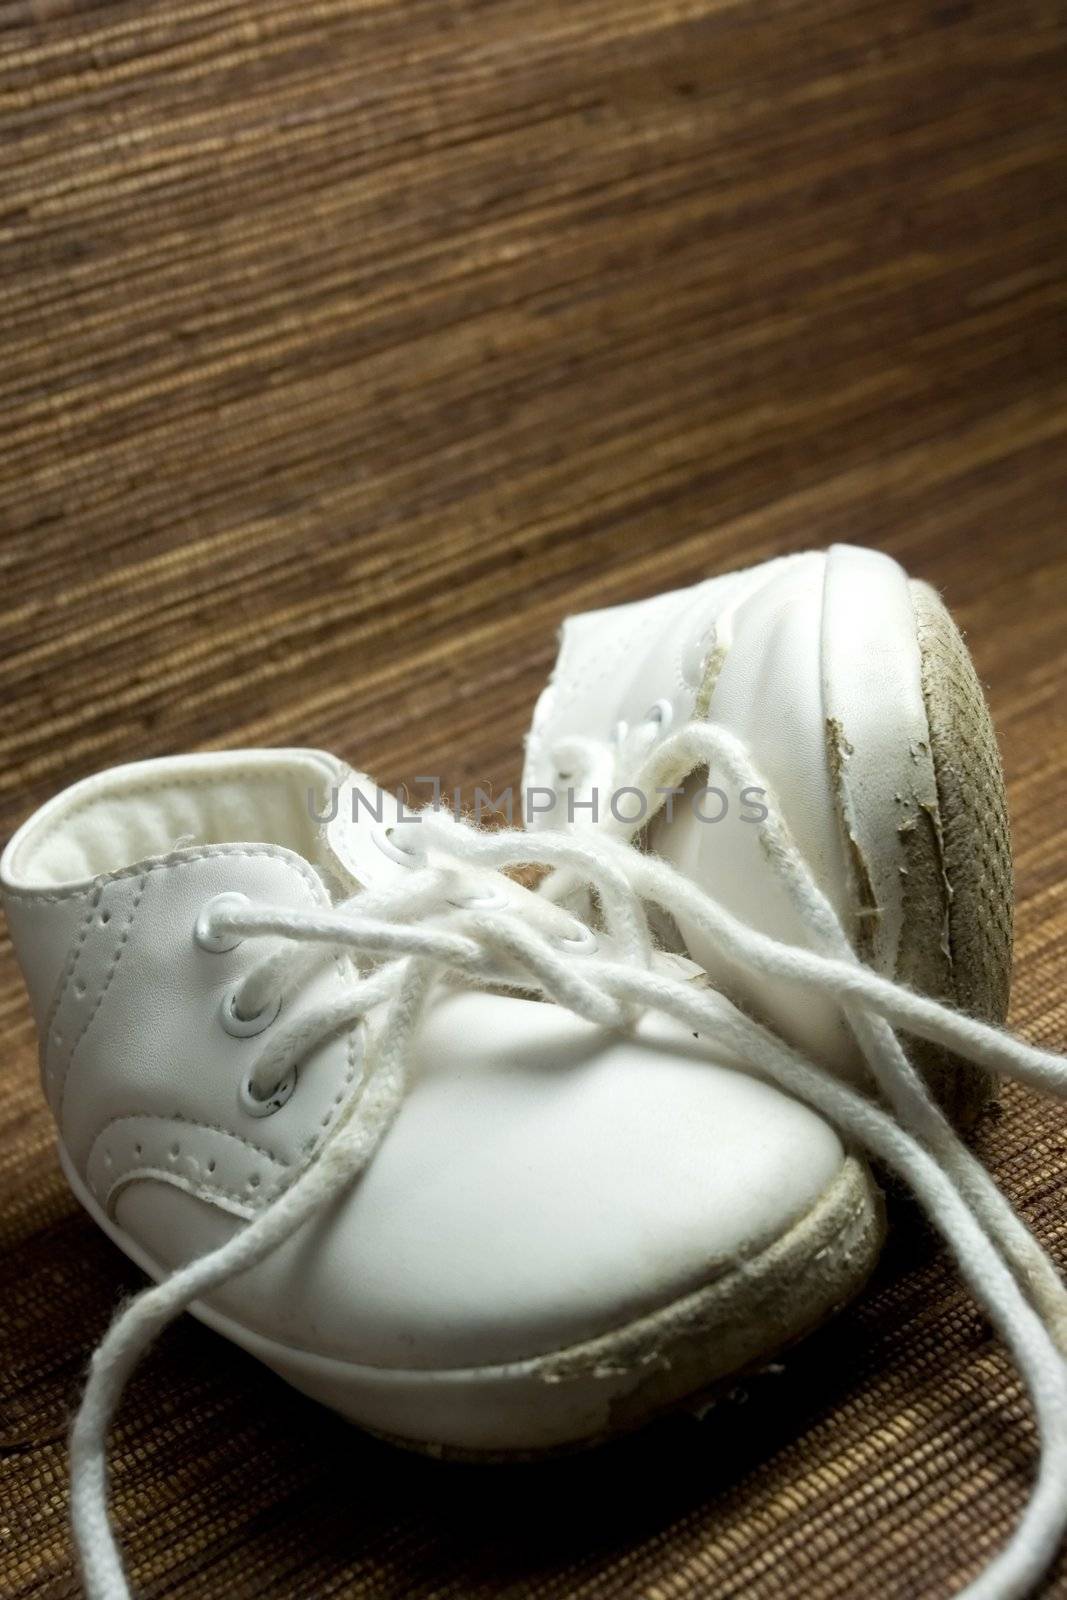 worn and used white baby shoes